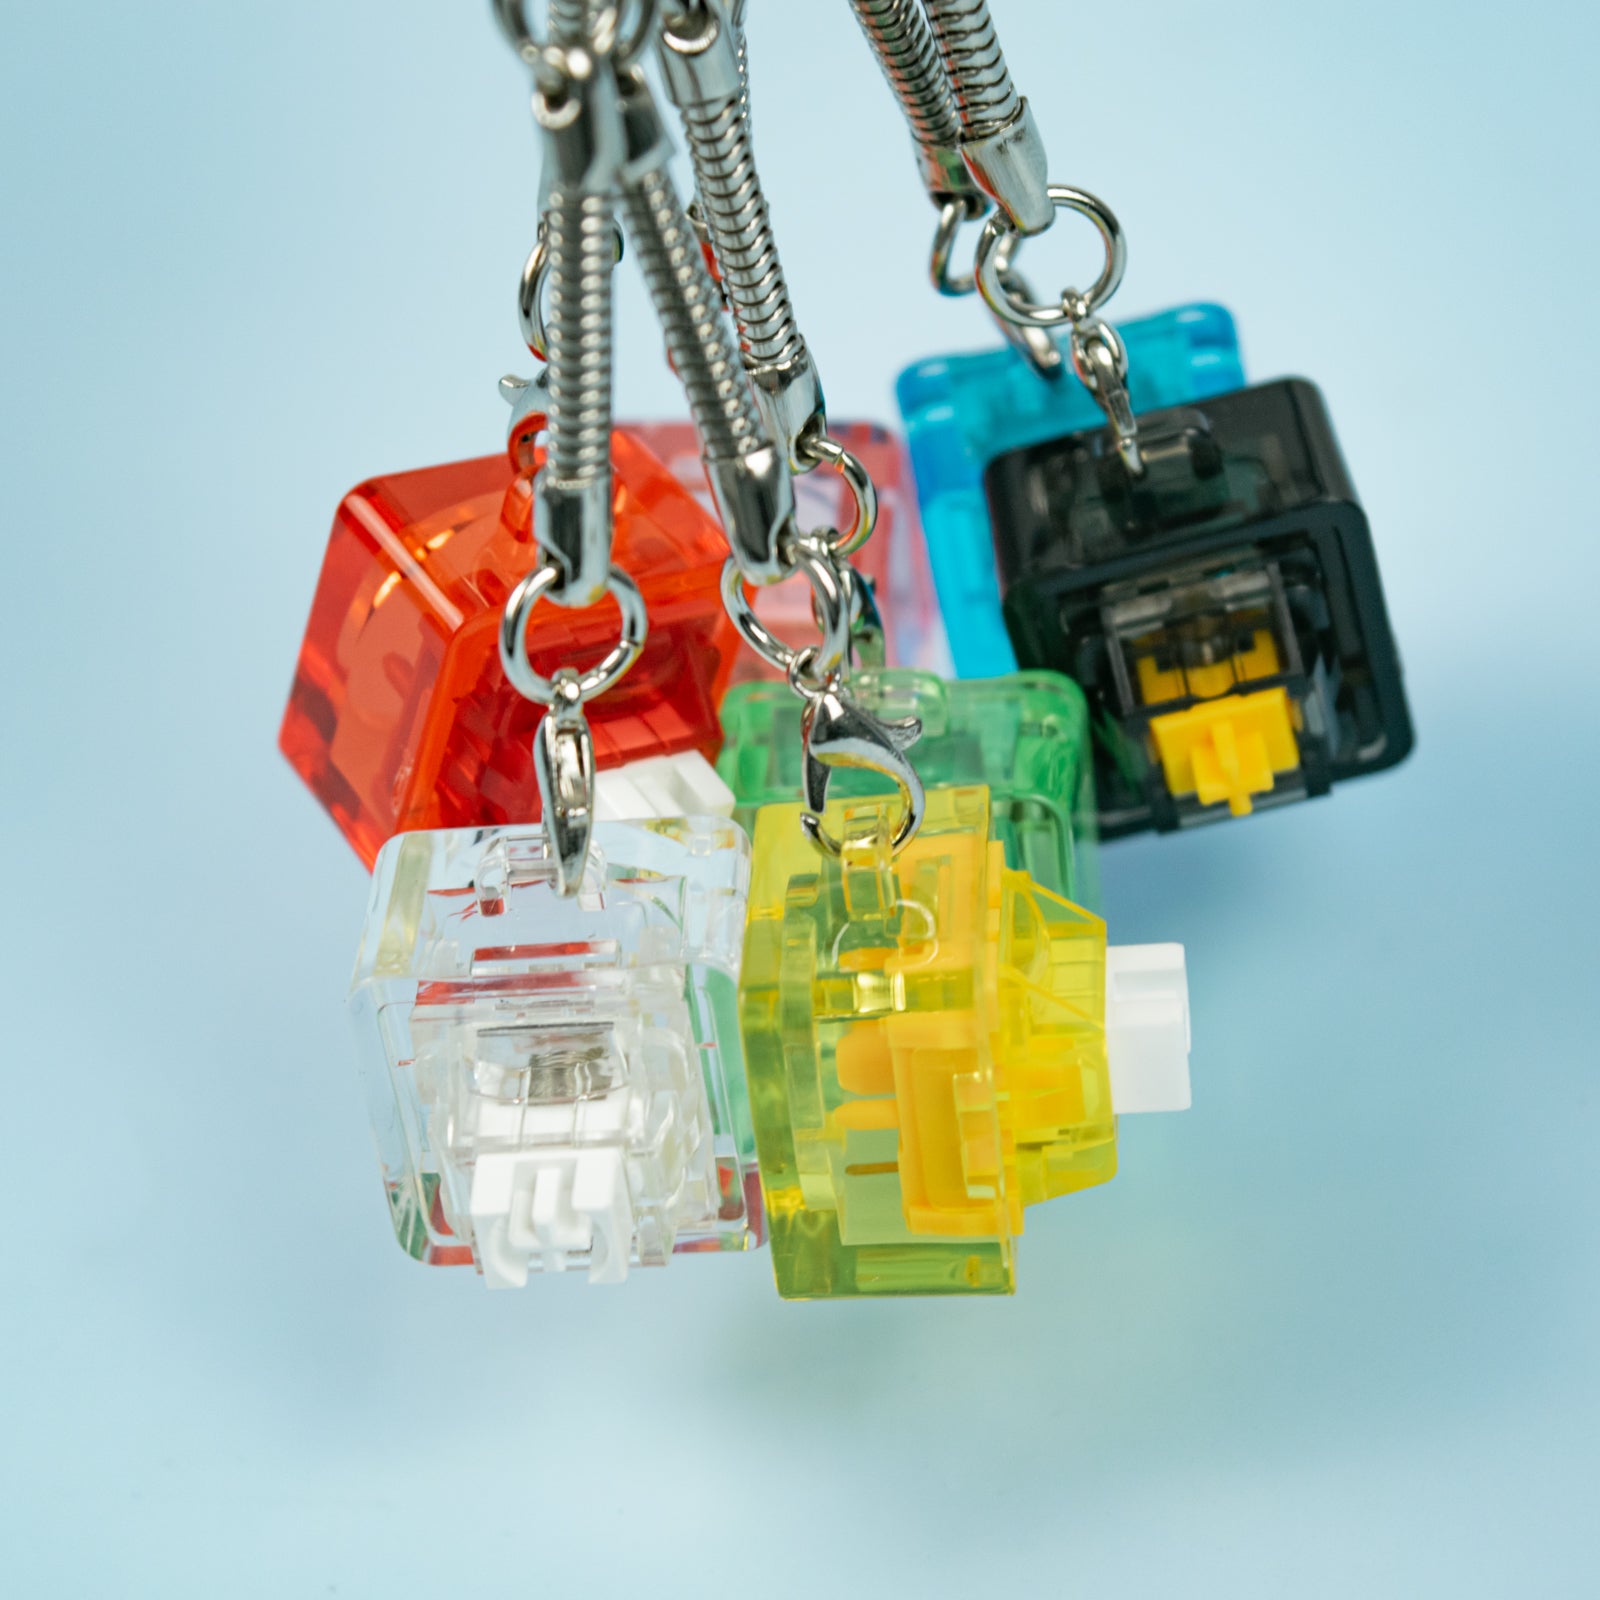 Glacier Mechanical Switches Keychain/Fidget/Tester (Switch and Keycap not included)